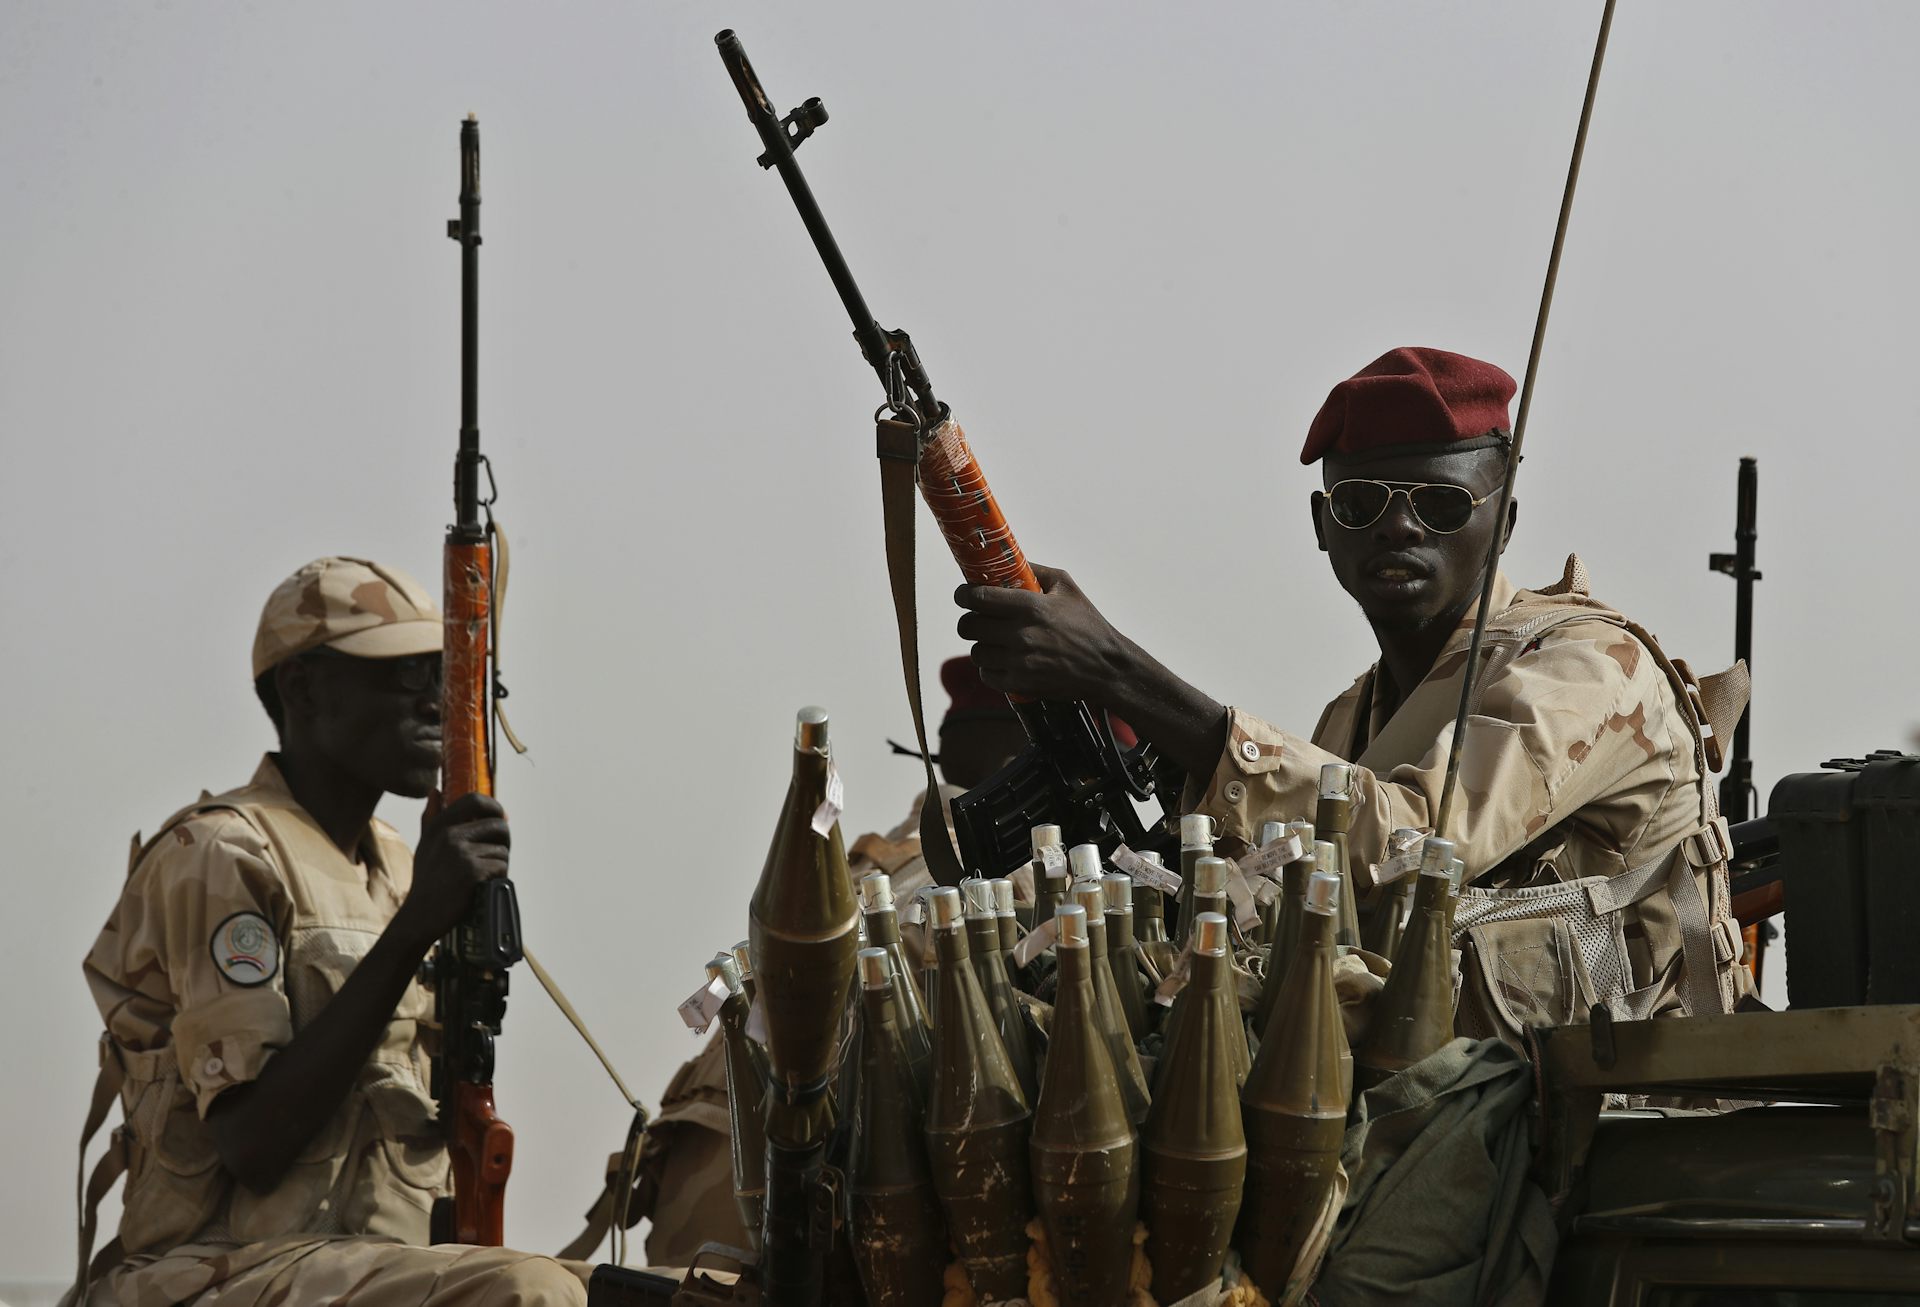 Amid Humanitarian Crisis and Ongoing Fighting, Africa’s War-Scarred Sahel Region Faces New Threat: Ethno-Mercenaries